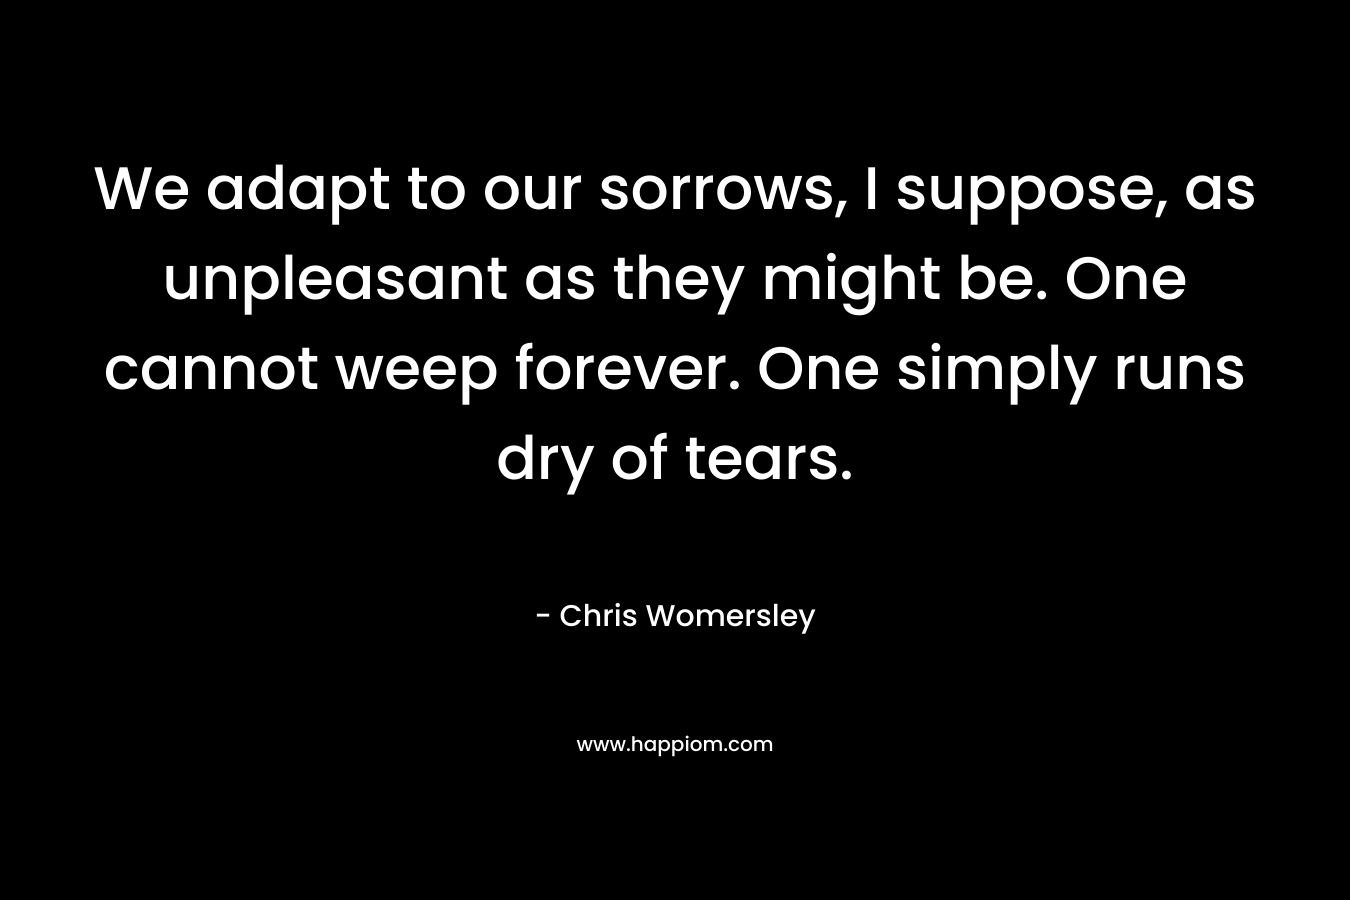 We adapt to our sorrows, I suppose, as unpleasant as they might be. One cannot weep forever. One simply runs dry of tears. – Chris Womersley